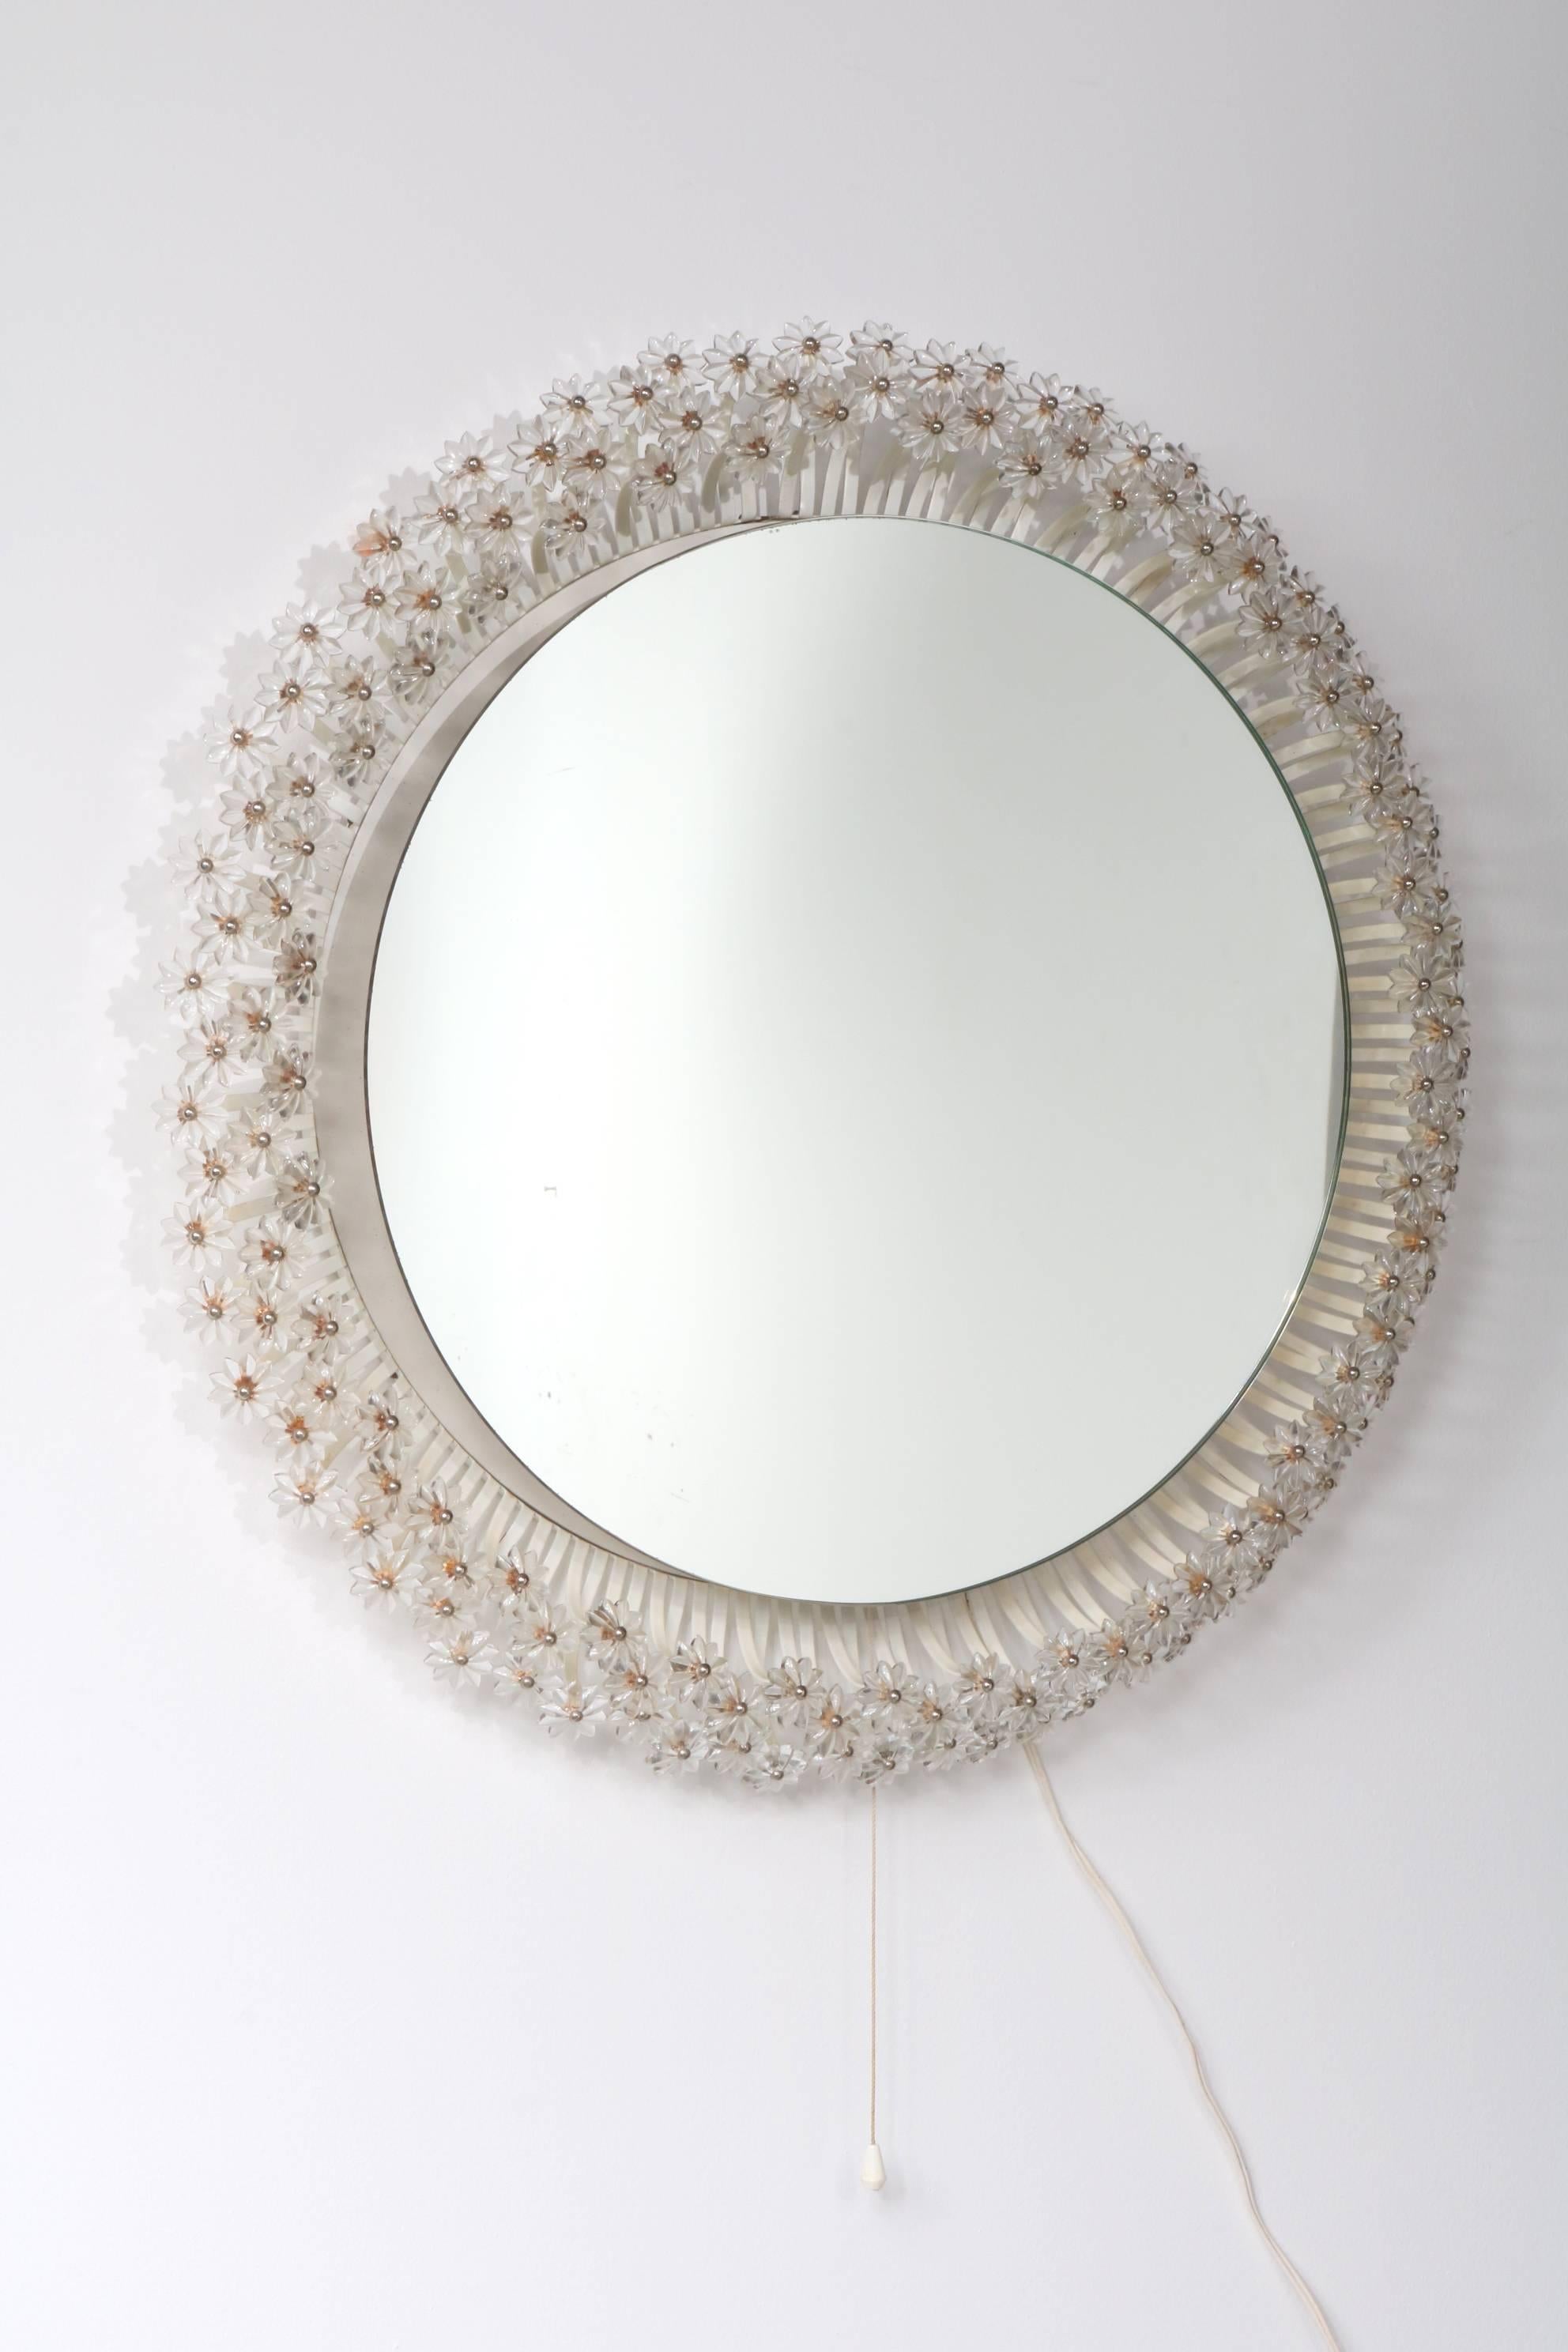 An outstanding backlit mirror designed by Emil Stejnar, manufactured by Rupert Nikoll in Austria around 1950.

The round mirror has an integrated frame with many beautiful little flowers made of glass with metal. This frame can be lit up, creating